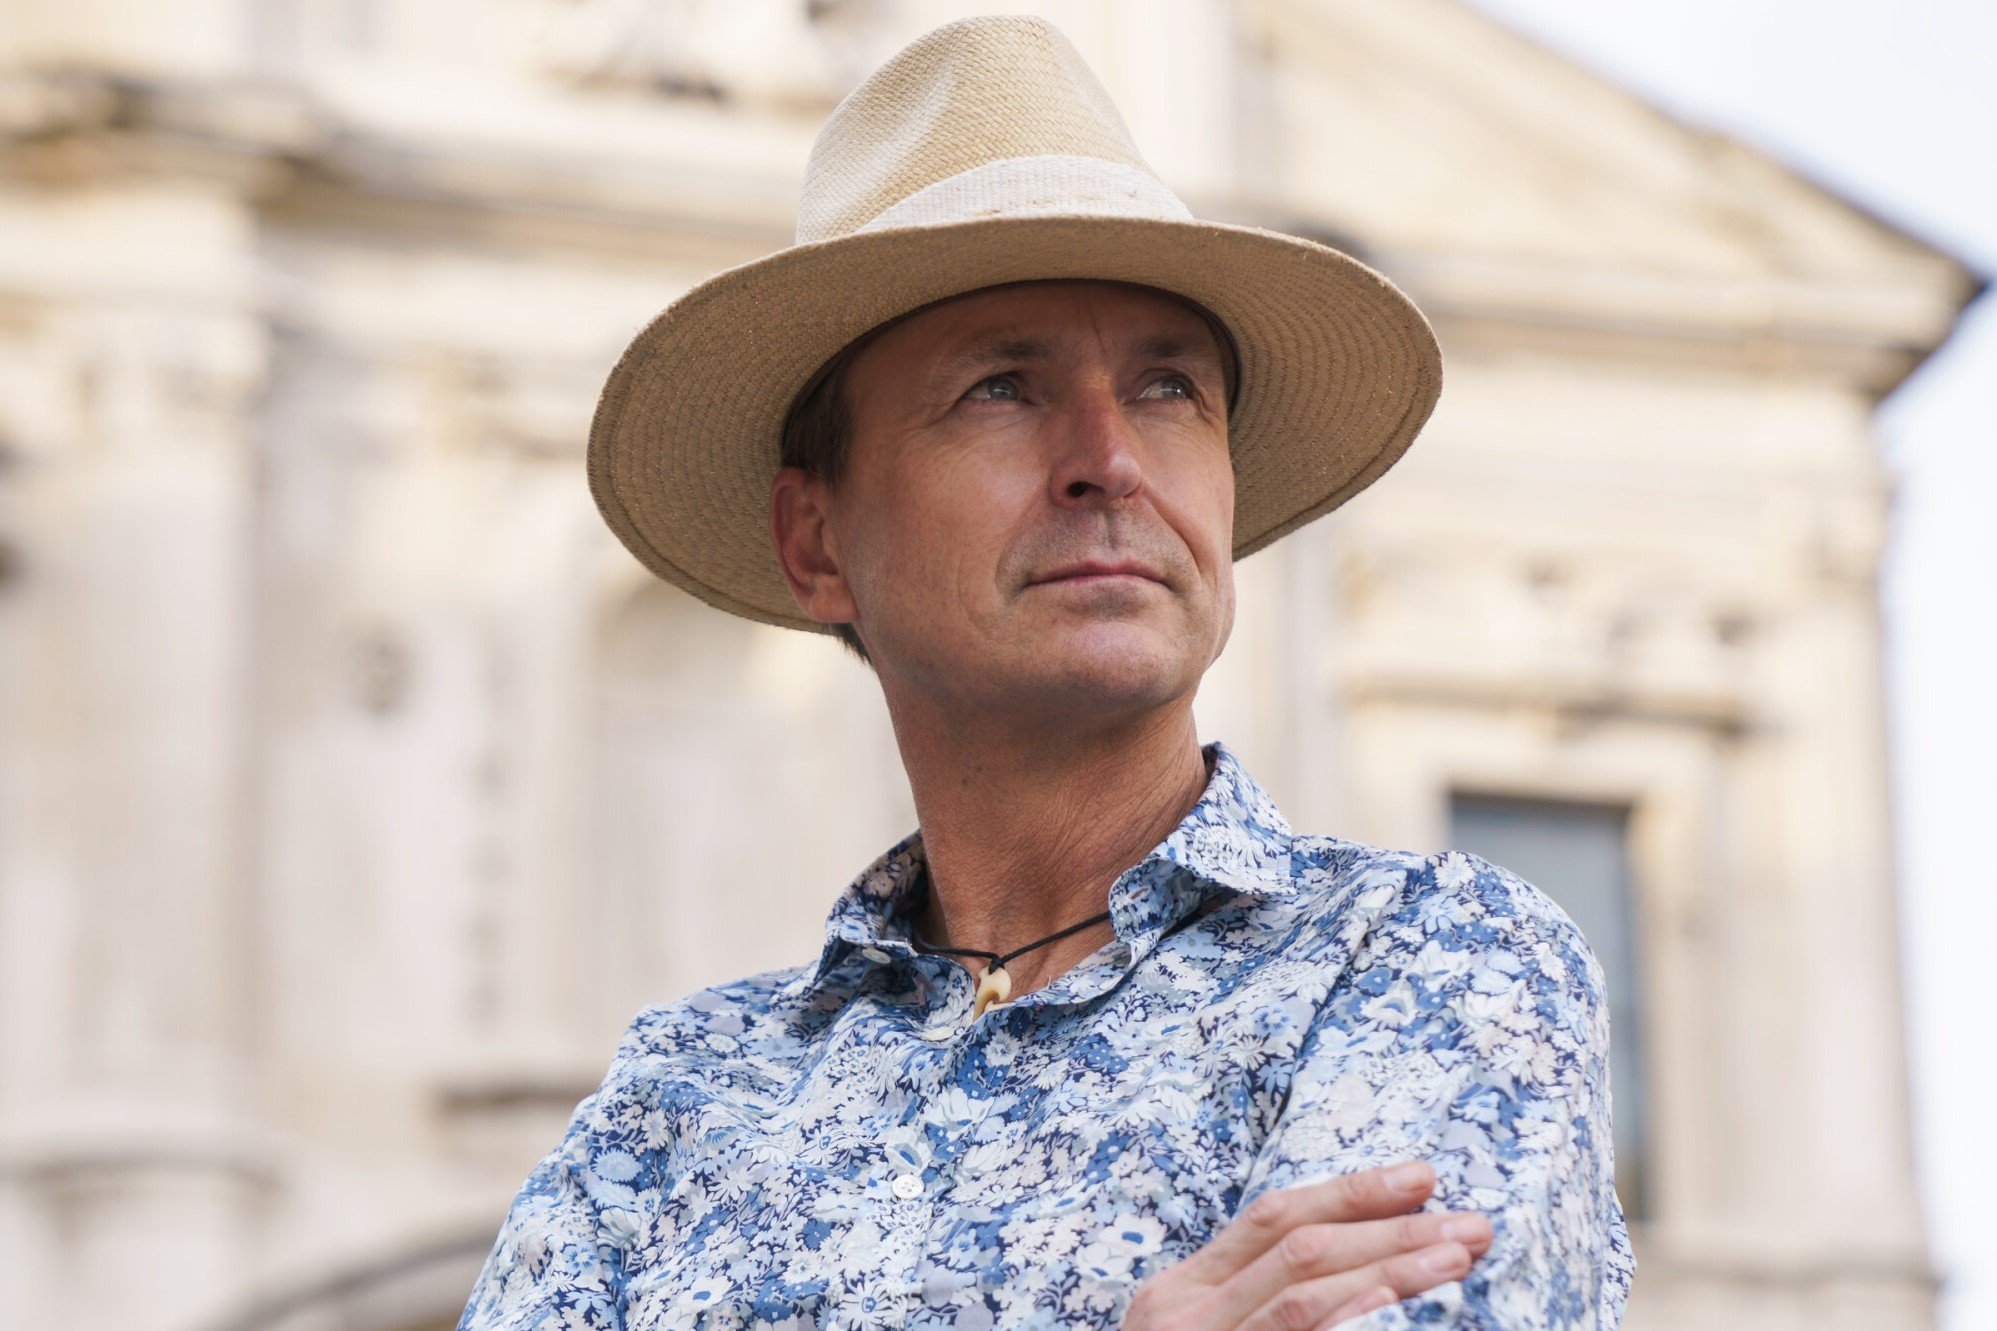 Phil Keoghan, who hosts 'The Amazing Race' Season 34 on CBS, wears a blue floral print button-up long-sleeved shirt and beige hat.